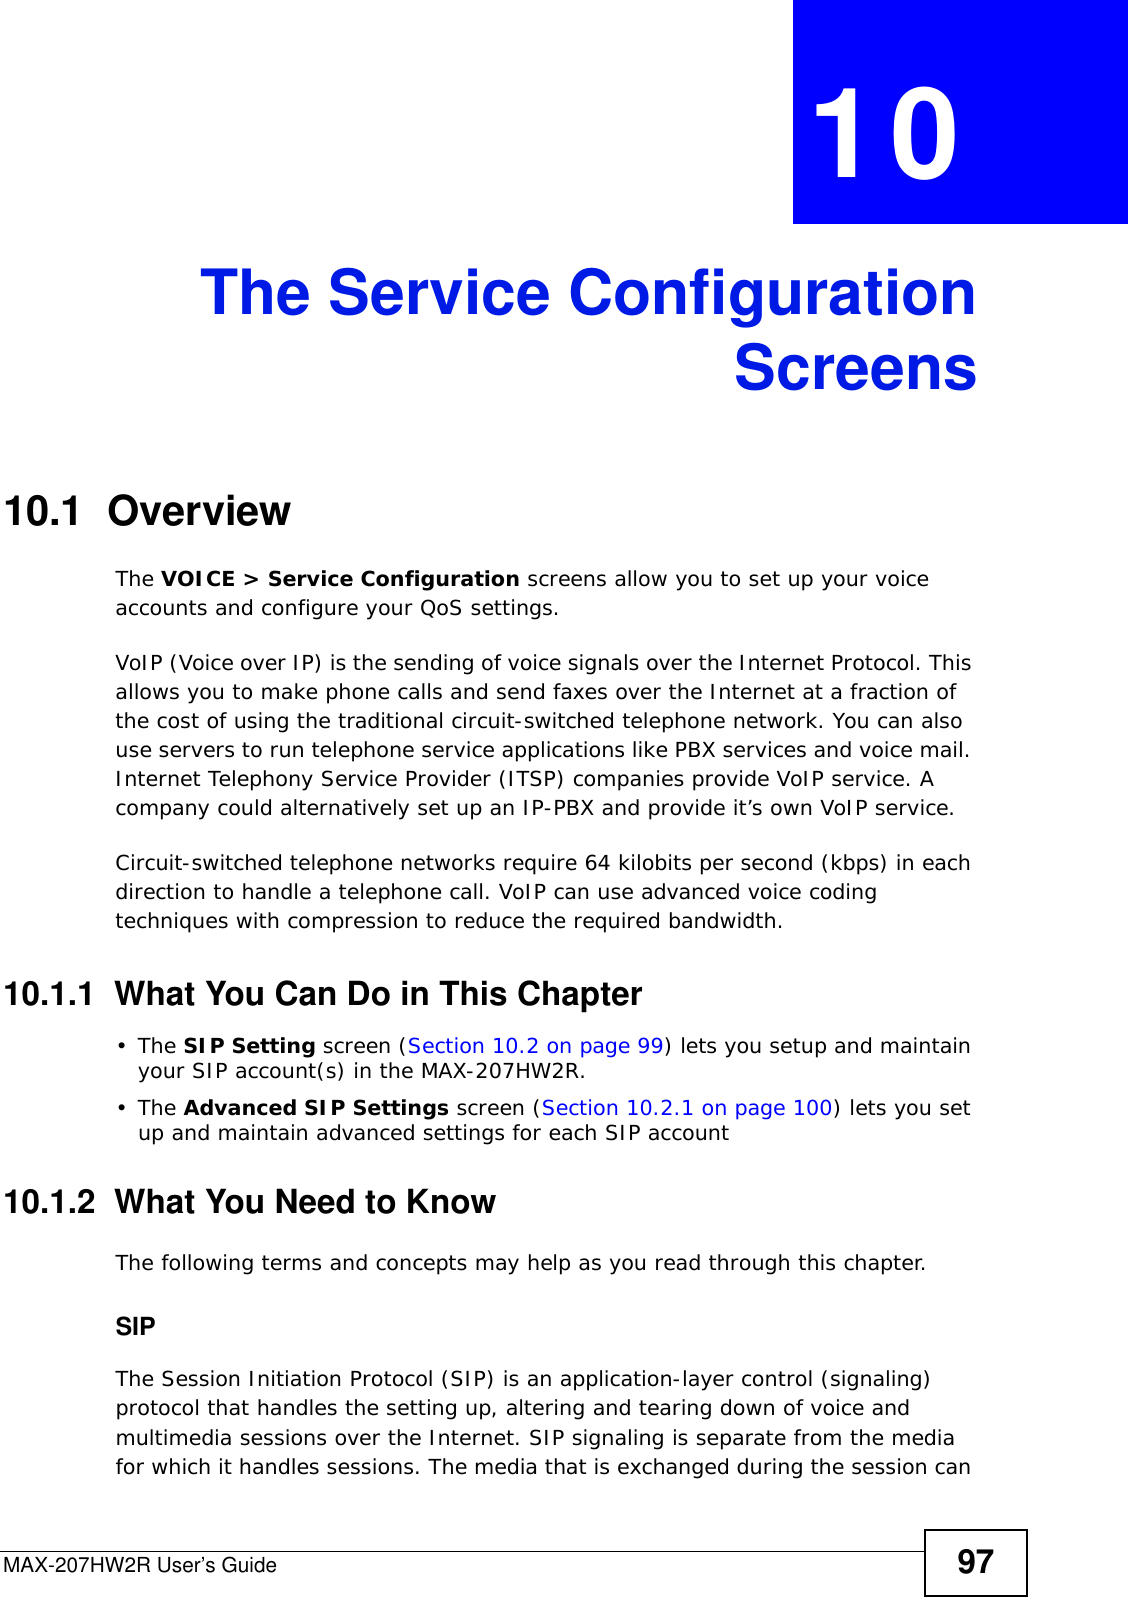 MAX-207HW2R User’s Guide 97CHAPTER  10 The Service ConfigurationScreens10.1  OverviewThe VOICE &gt; Service Configuration screens allow you to set up your voice accounts and configure your QoS settings.VoIP (Voice over IP) is the sending of voice signals over the Internet Protocol. This allows you to make phone calls and send faxes over the Internet at a fraction of the cost of using the traditional circuit-switched telephone network. You can also use servers to run telephone service applications like PBX services and voice mail. Internet Telephony Service Provider (ITSP) companies provide VoIP service. A company could alternatively set up an IP-PBX and provide it’s own VoIP service.Circuit-switched telephone networks require 64 kilobits per second (kbps) in each direction to handle a telephone call. VoIP can use advanced voice coding techniques with compression to reduce the required bandwidth.10.1.1  What You Can Do in This Chapter•The SIP Setting screen (Section 10.2 on page 99) lets you setup and maintain your SIP account(s) in the MAX-207HW2R.•The Advanced SIP Settings screen (Section 10.2.1 on page 100) lets you set up and maintain advanced settings for each SIP account10.1.2  What You Need to KnowThe following terms and concepts may help as you read through this chapter.SIPThe Session Initiation Protocol (SIP) is an application-layer control (signaling) protocol that handles the setting up, altering and tearing down of voice and multimedia sessions over the Internet. SIP signaling is separate from the media for which it handles sessions. The media that is exchanged during the session can 